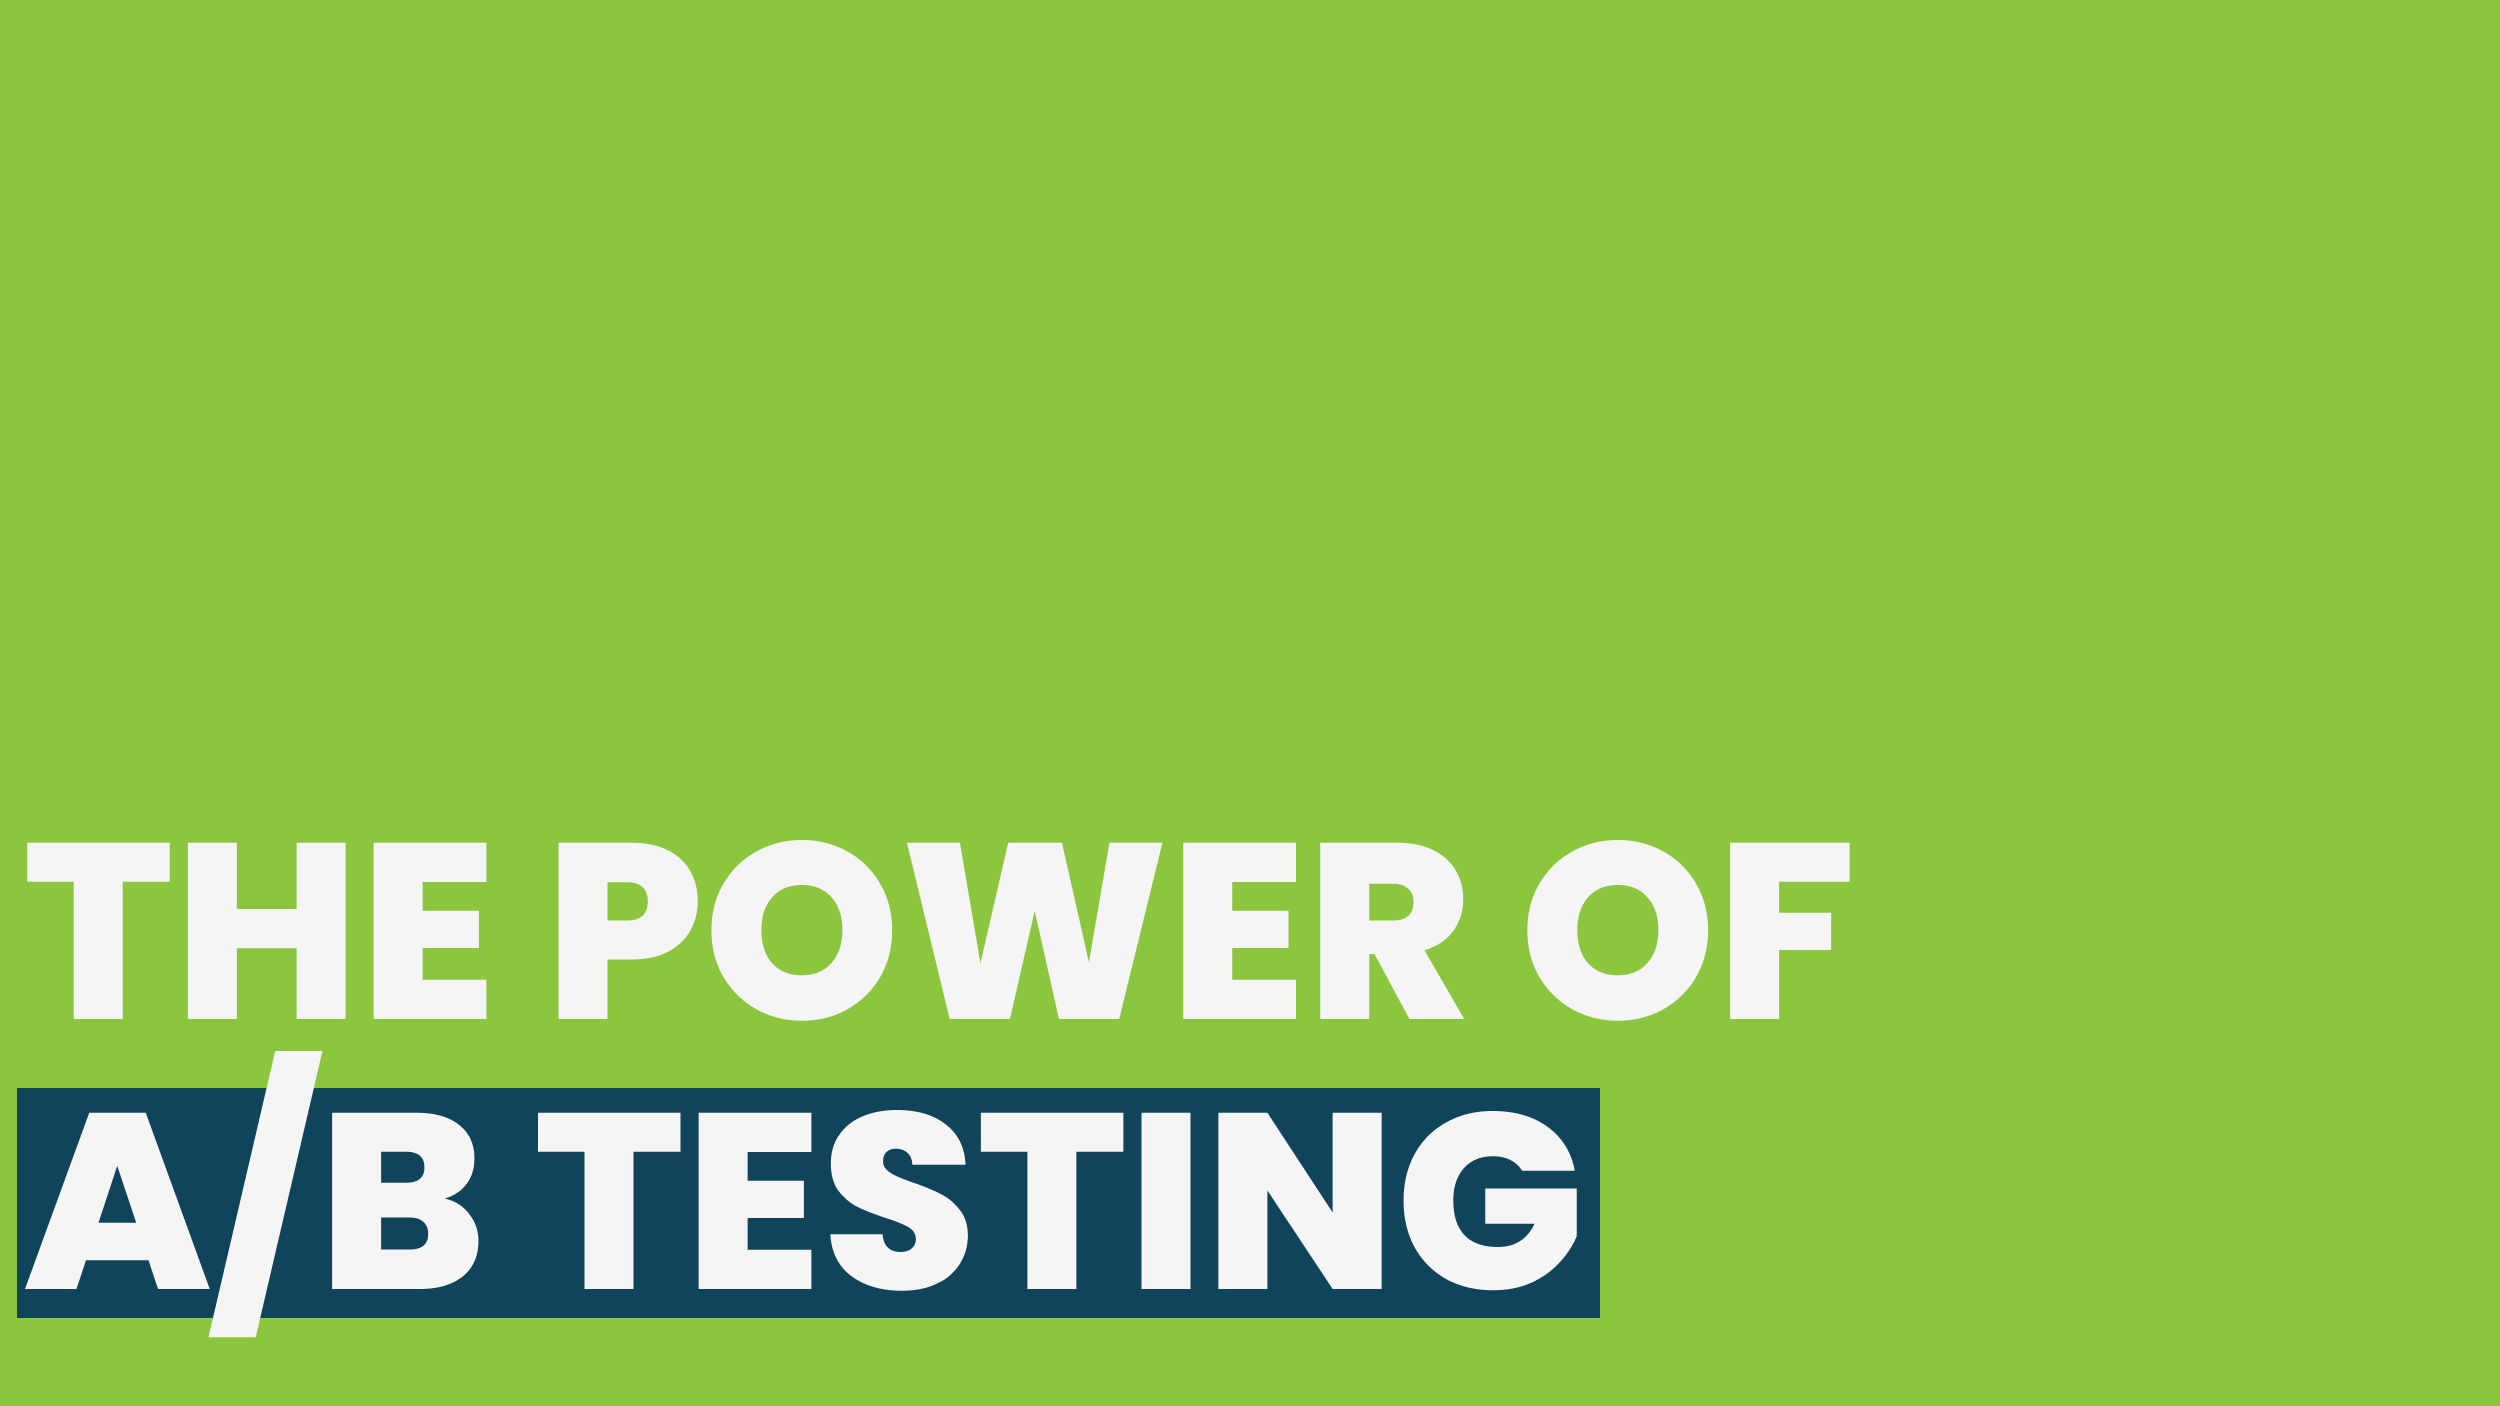 The Power of A/B Testing: Why Every Marketer Should Embrace It